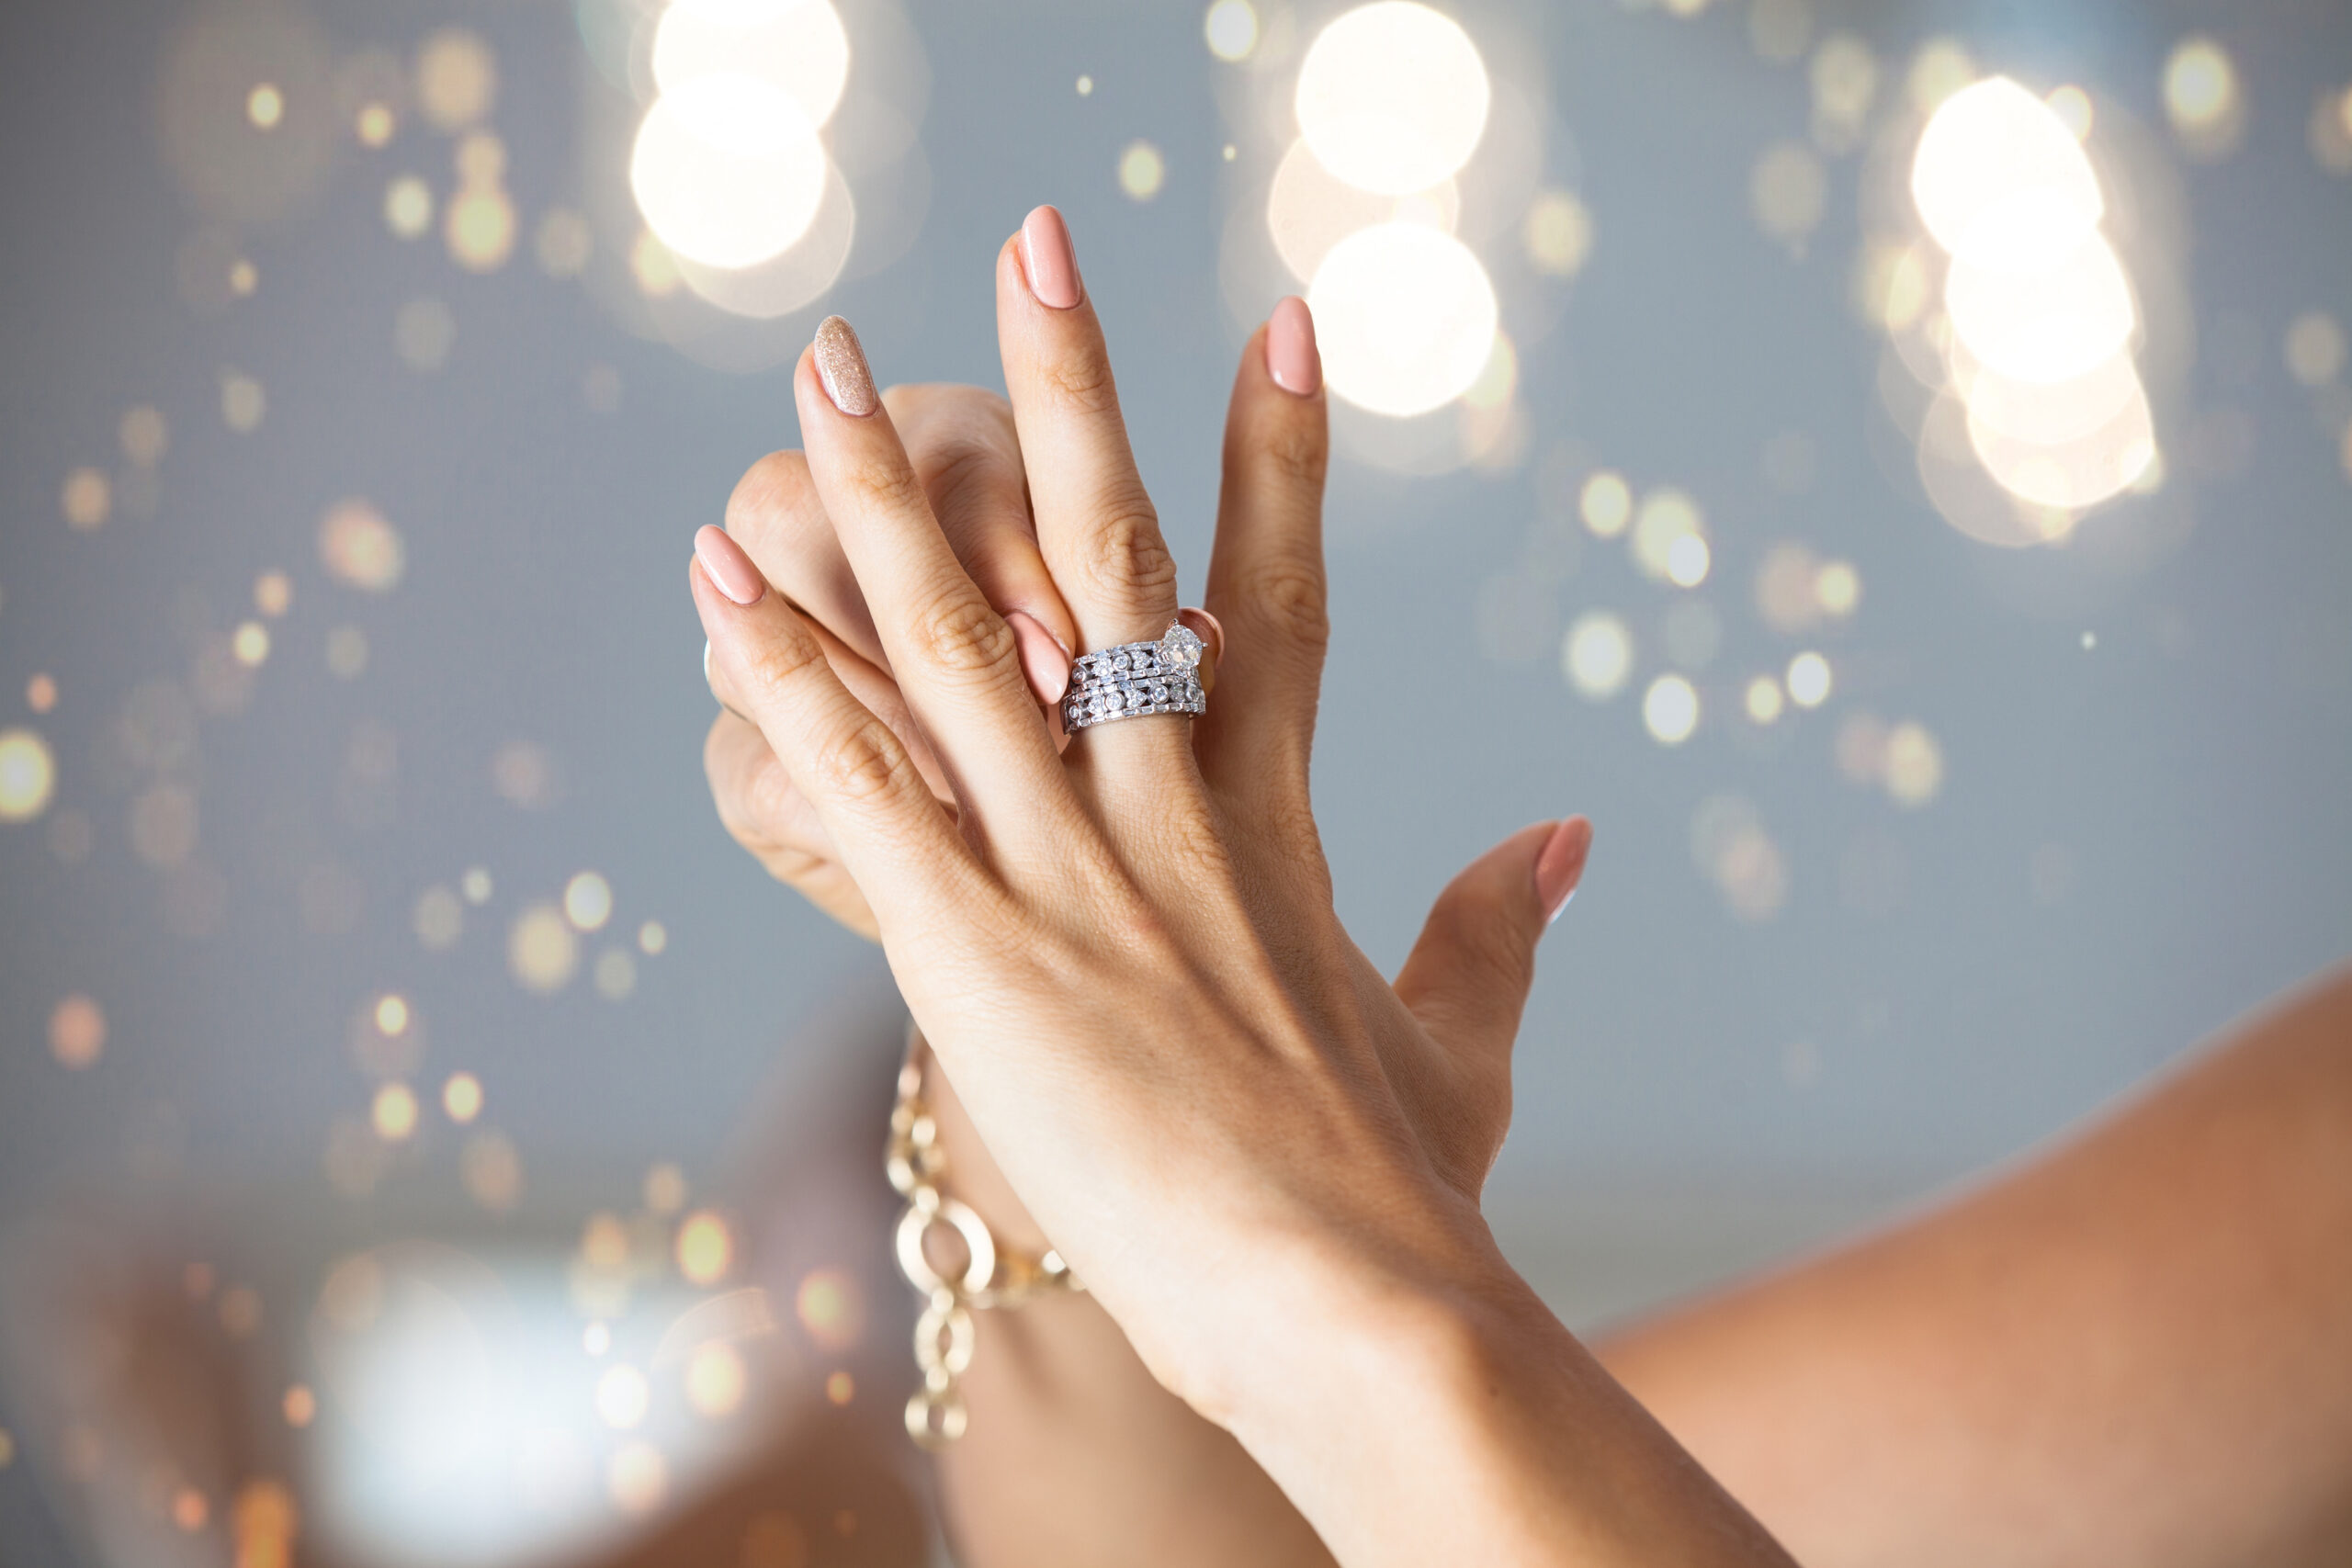 3 Tips For Picking An Engagement Ring You’ll Cherish For A Lifetime